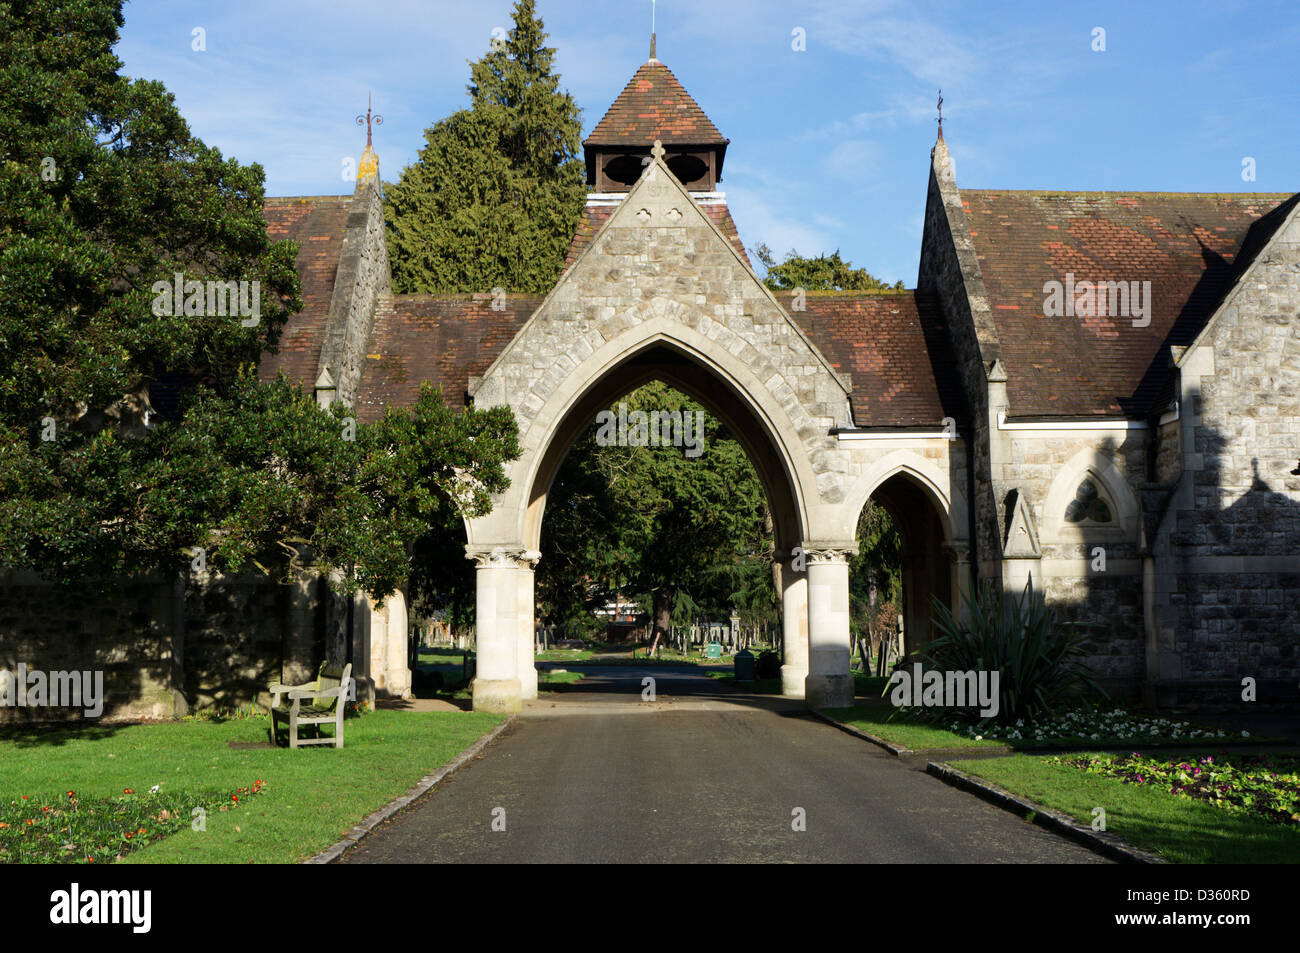 Entrance to the London Road Cemetery in Bromley, South London. Stock Photo